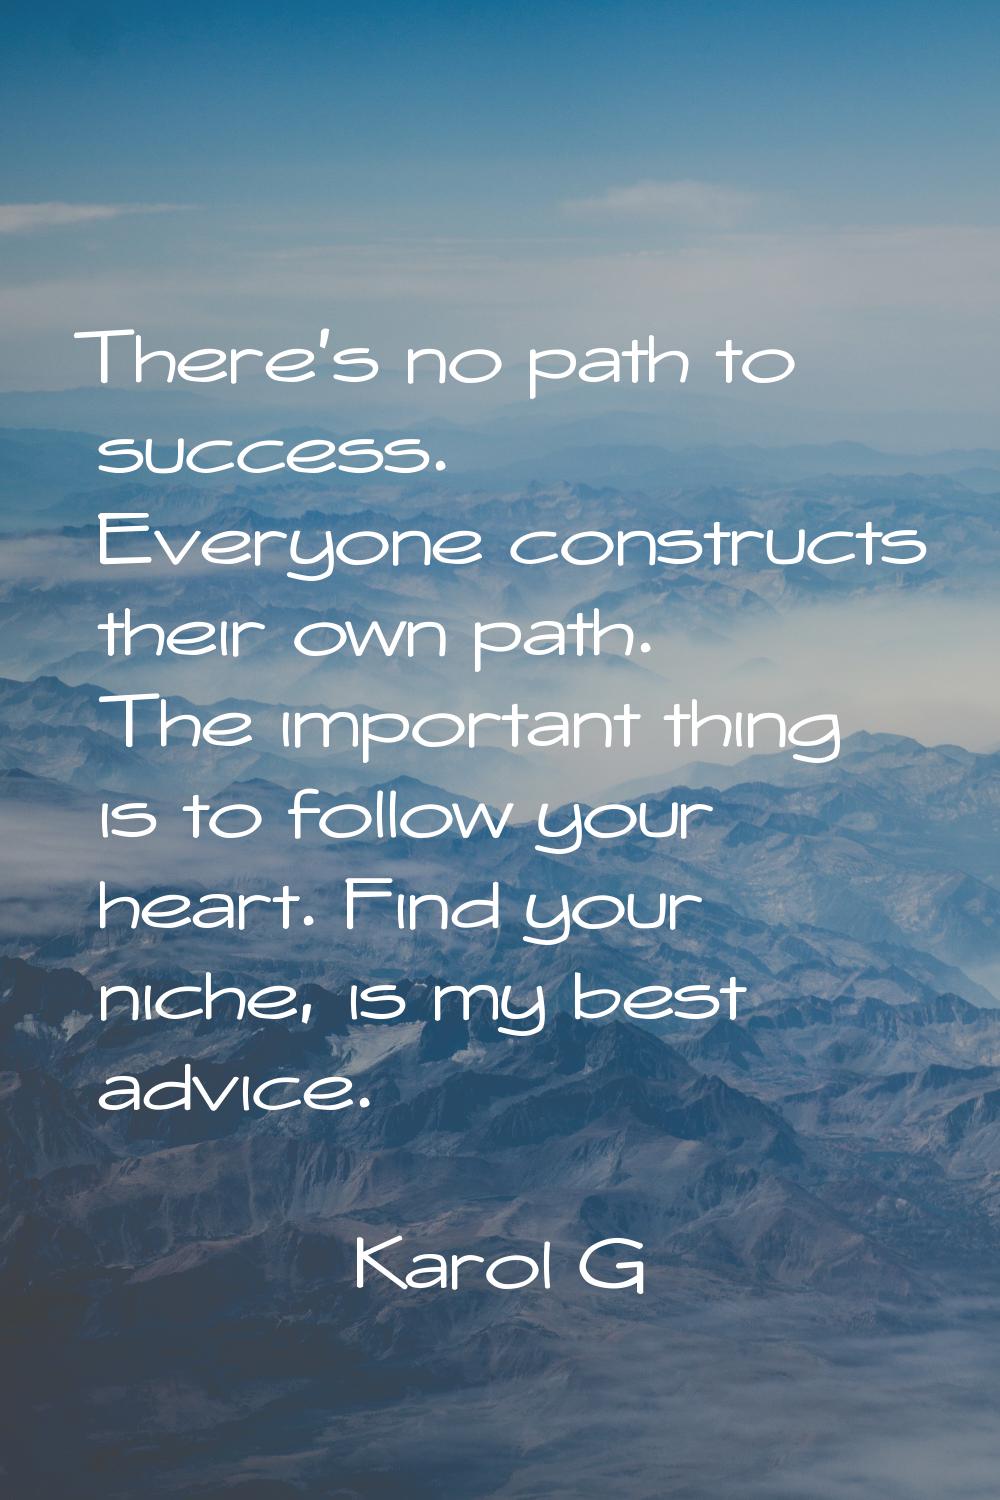 There's no path to success. Everyone constructs their own path. The important thing is to follow yo